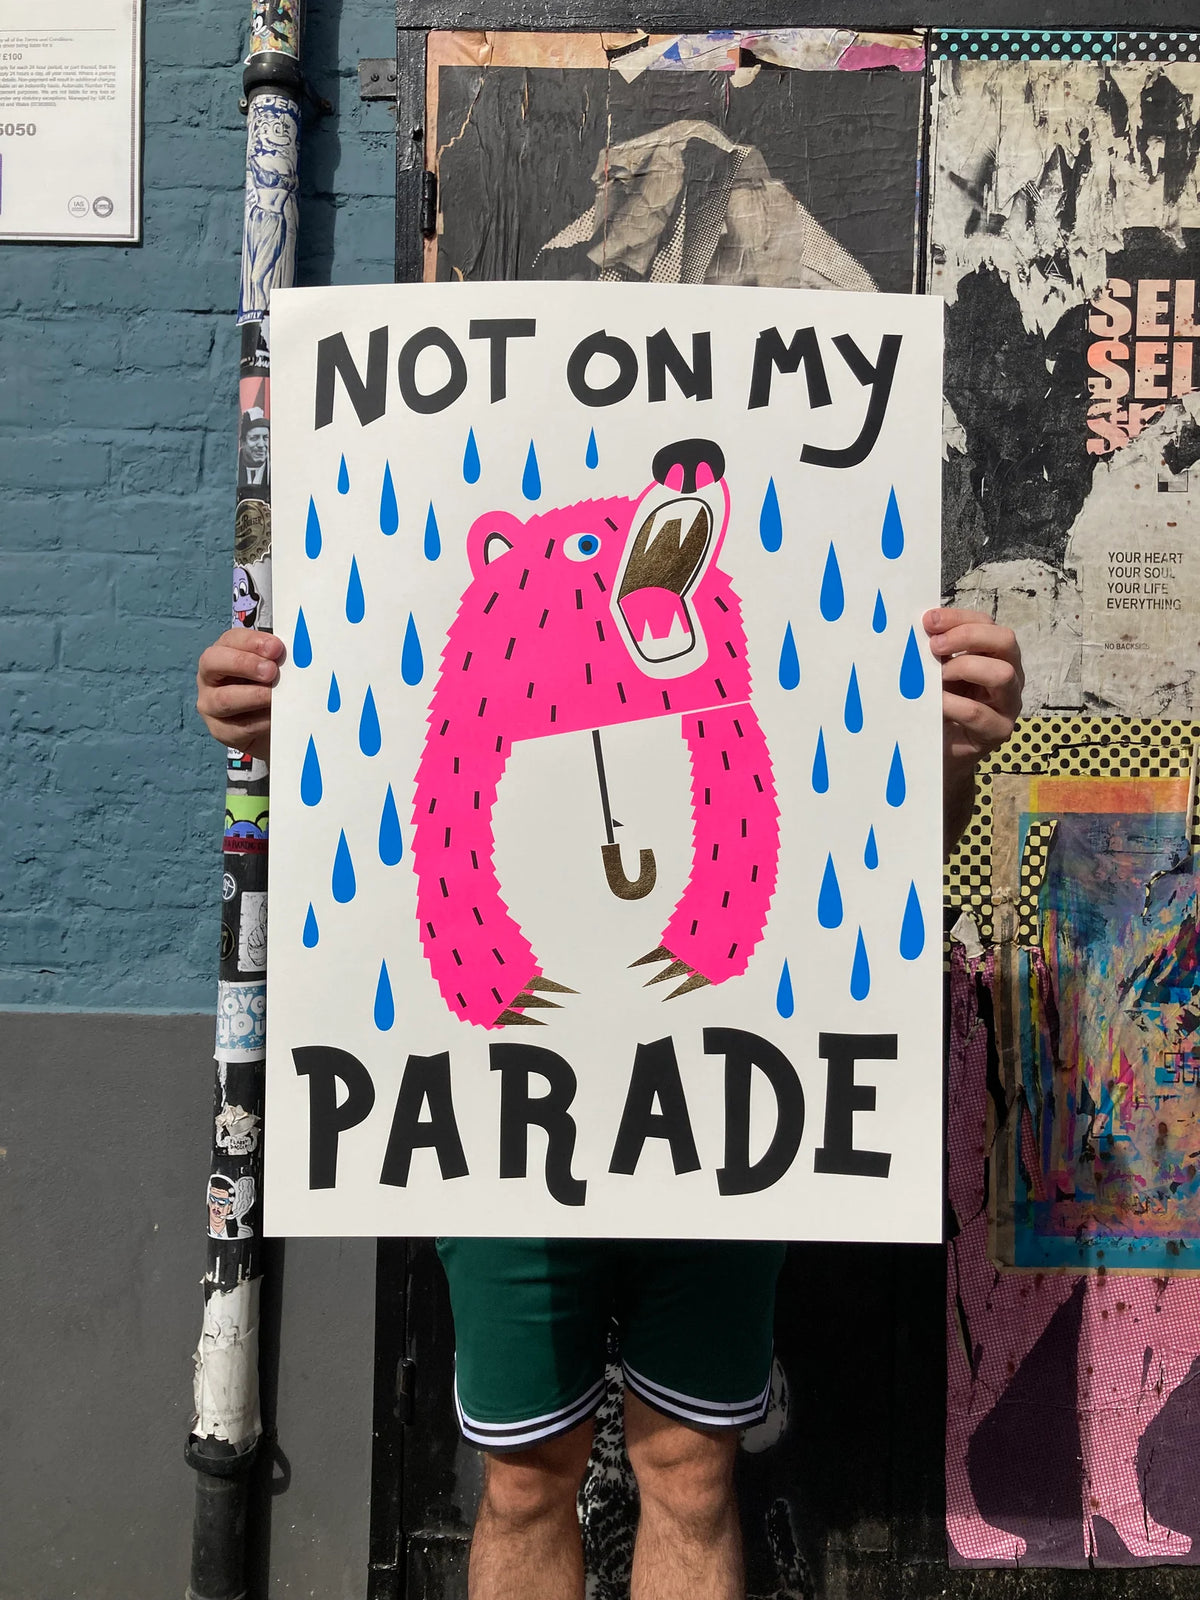 Not on My parade by David Newton